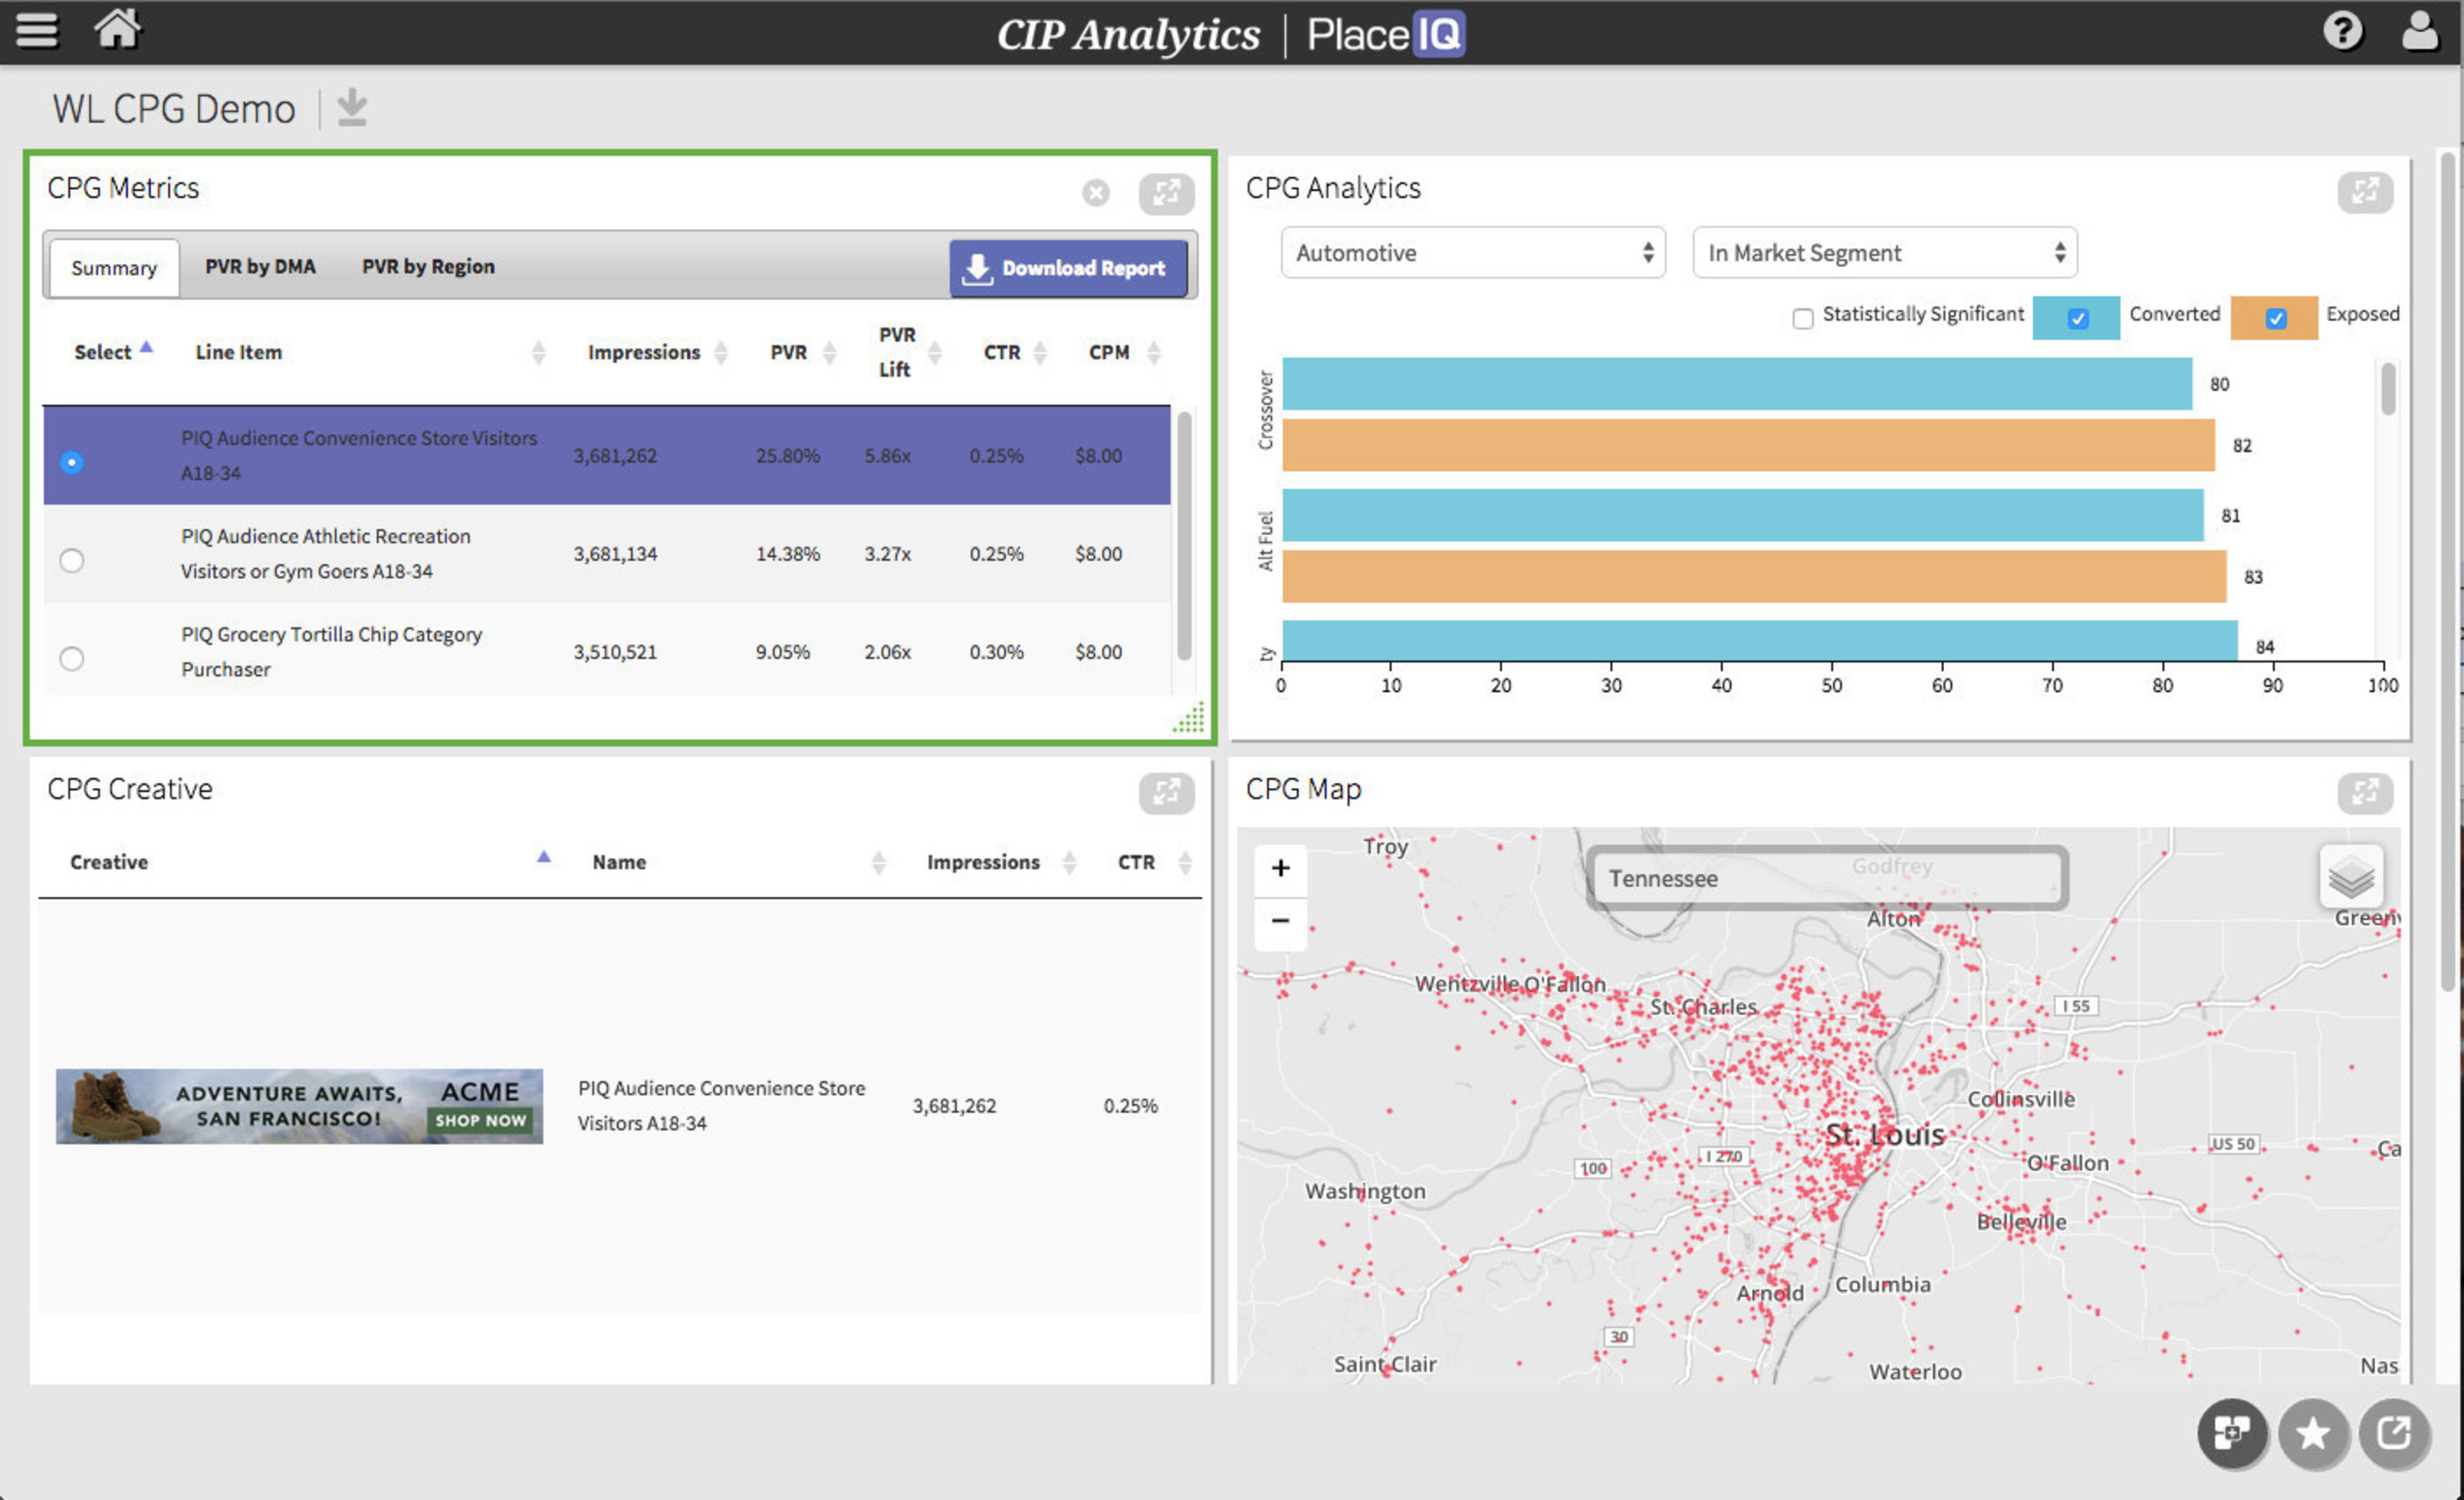 CIP Analytics by PlaceIQ